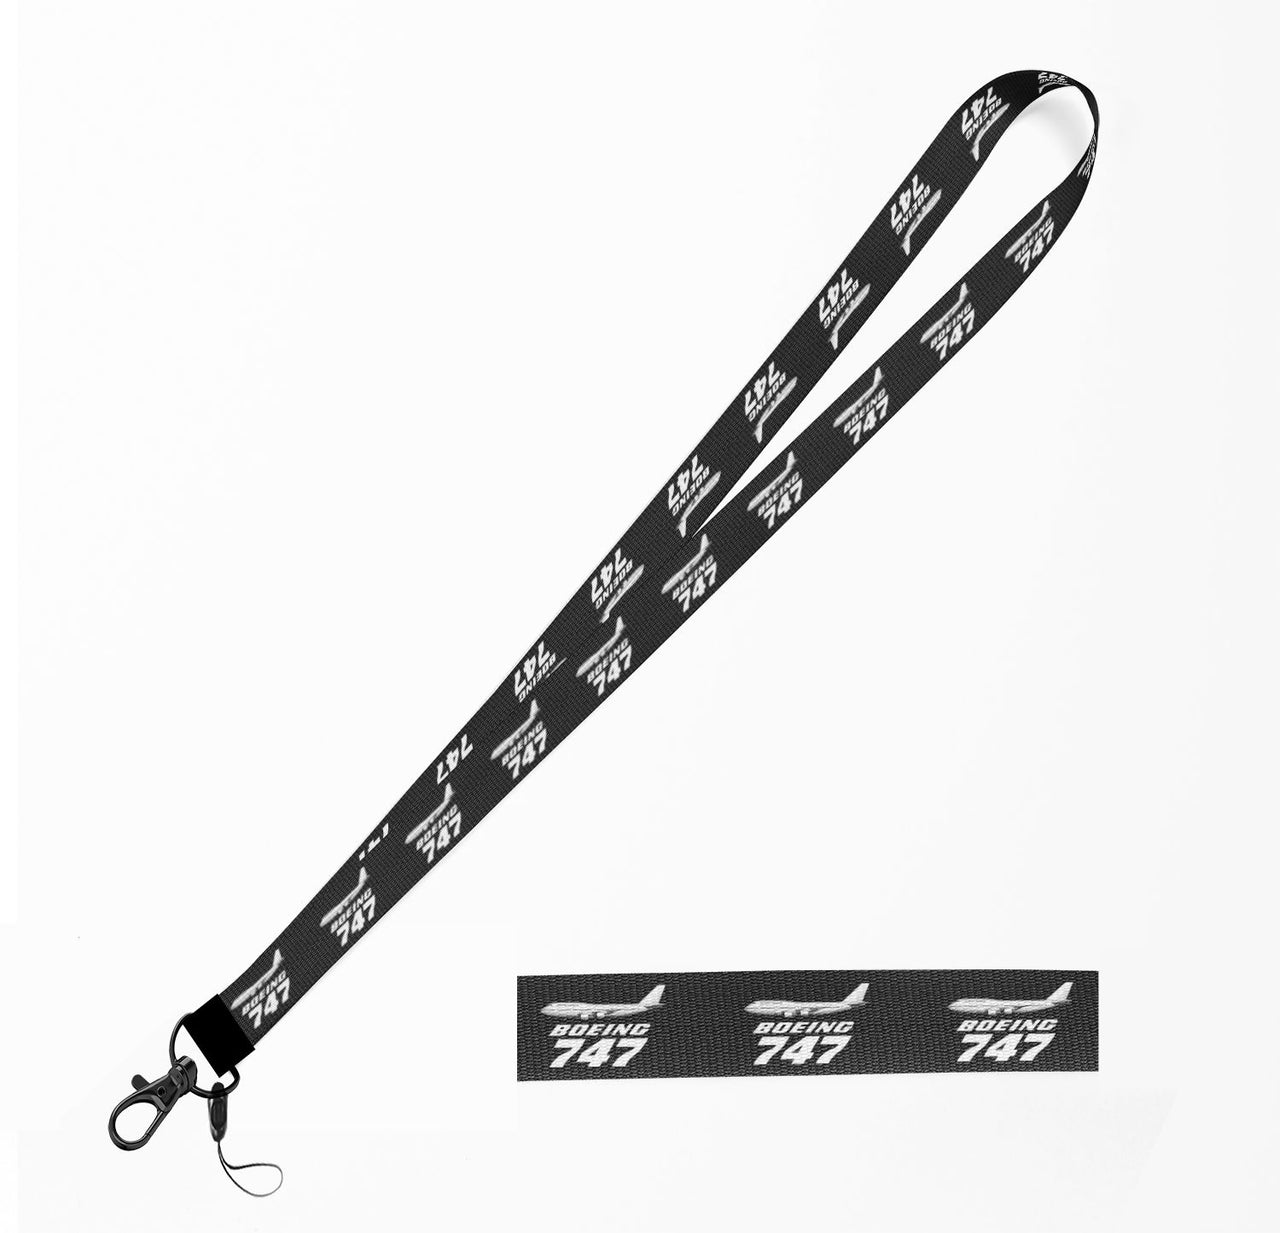 The Boeing 747 Designed Lanyard & ID Holders